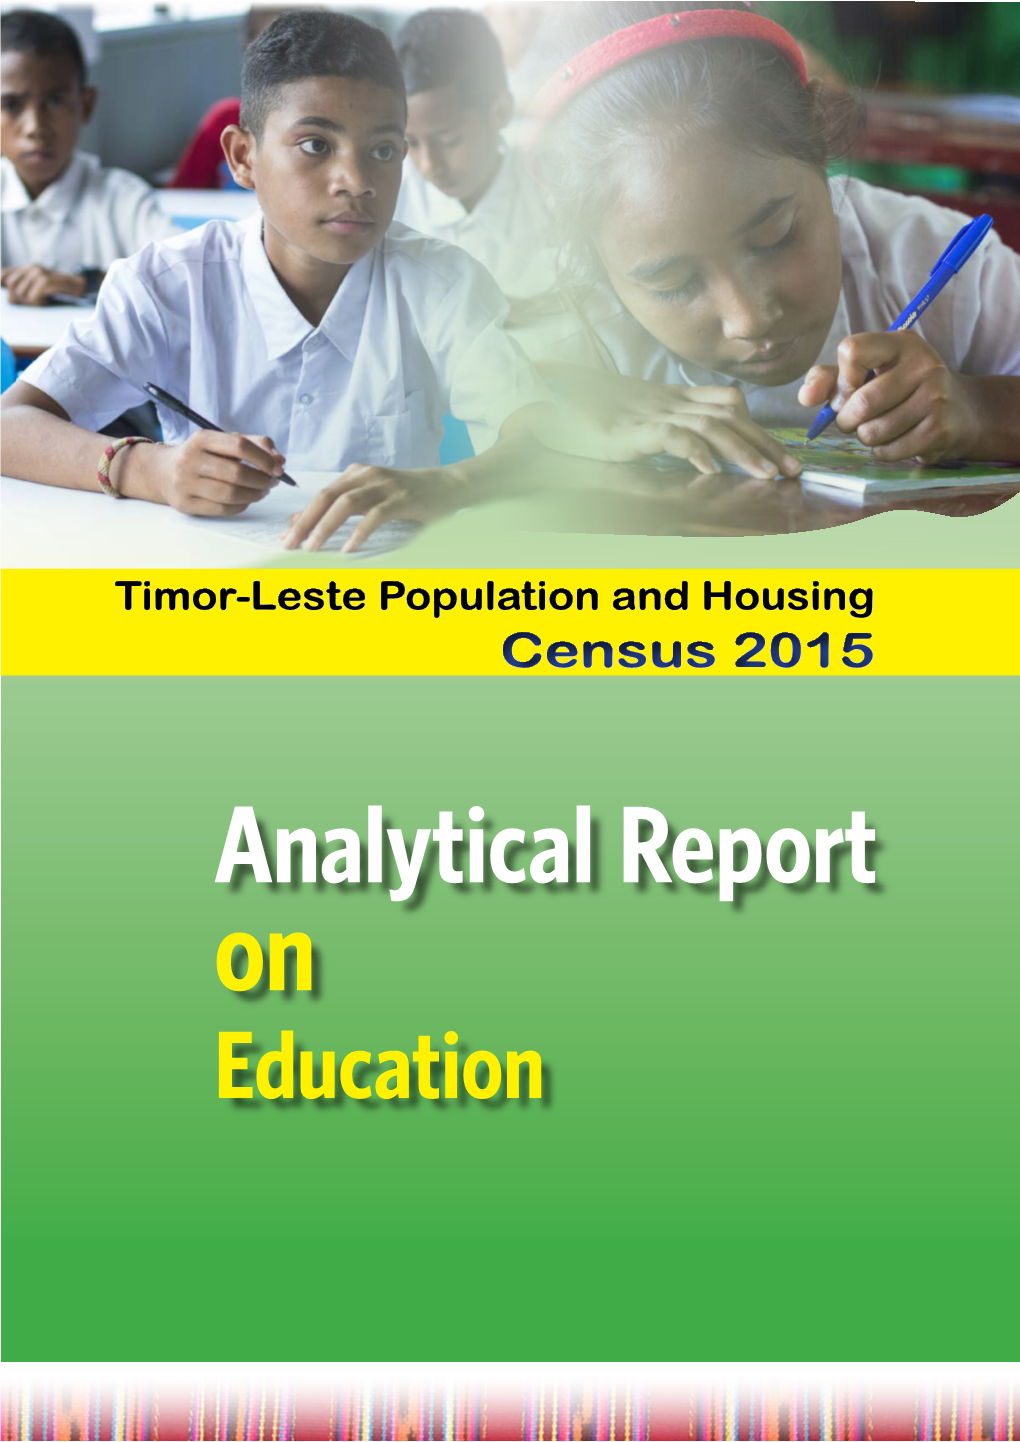 Analytical Report on Education Timor-Leste Population and Housing Census 2015